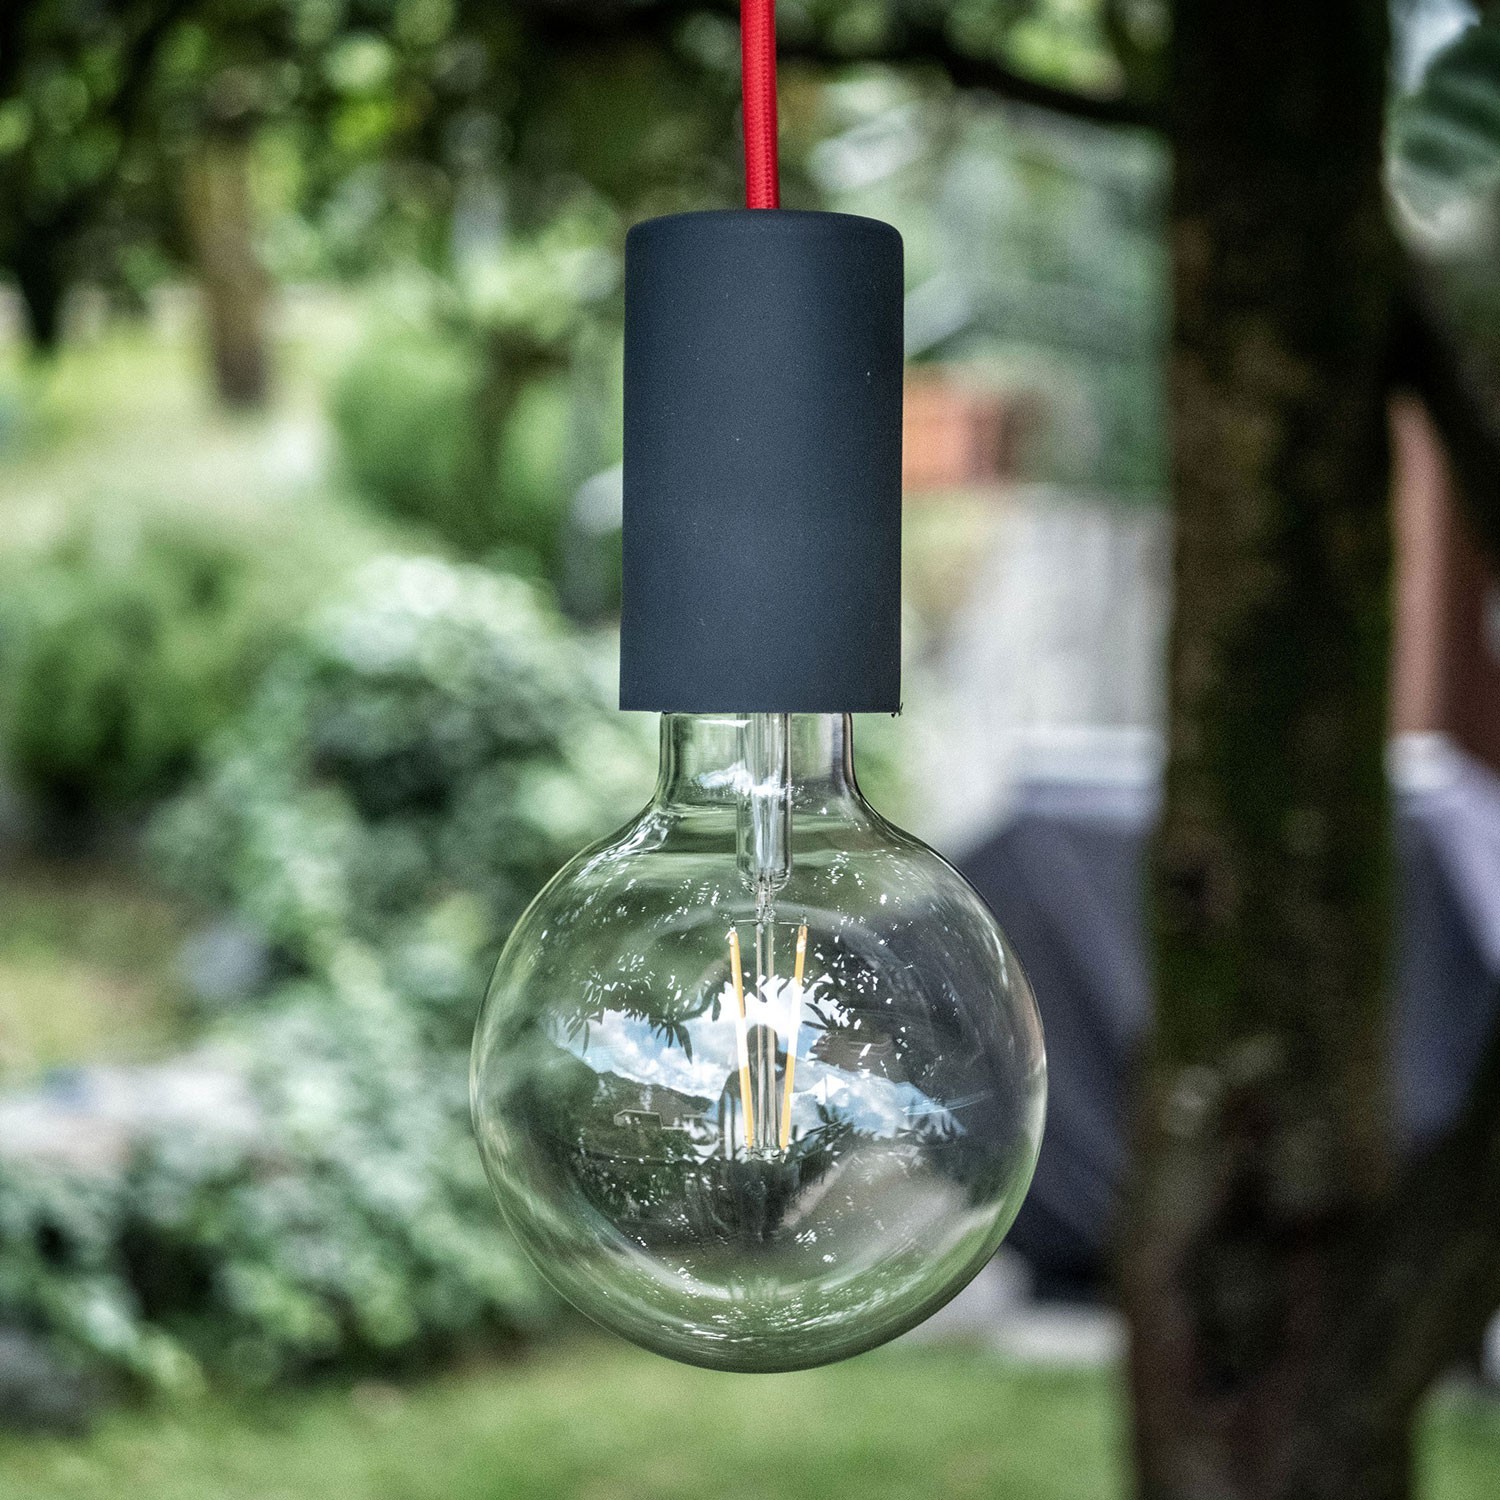 EIVA ELEGANT Outdoor pendant lamp with 5 mt textile cable, decentralizer, ceiling rose and lamp holder IP65 water resistant